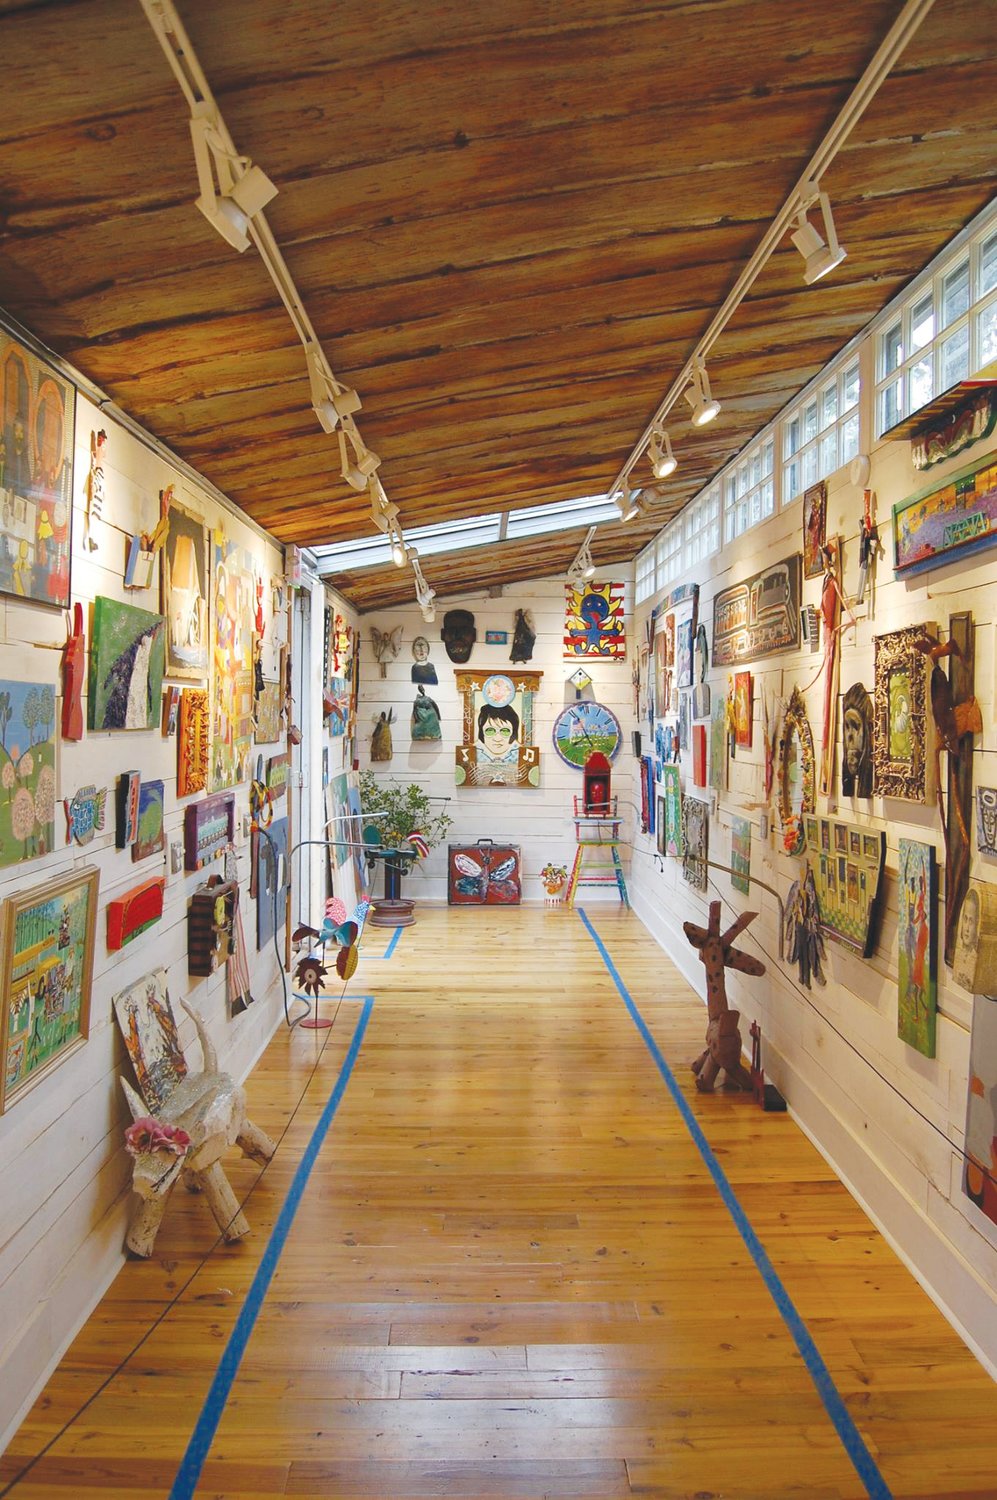 Opened in 2016 by collectors Dave Clark and his wife, Lisa Piper, the Small Museum of Folk Art is home to nearly 600 pieces of folk and outsider art, including pieces from local artists Clyde Jones, Vollis Simpson and Jimmy Lee Sudduth. .